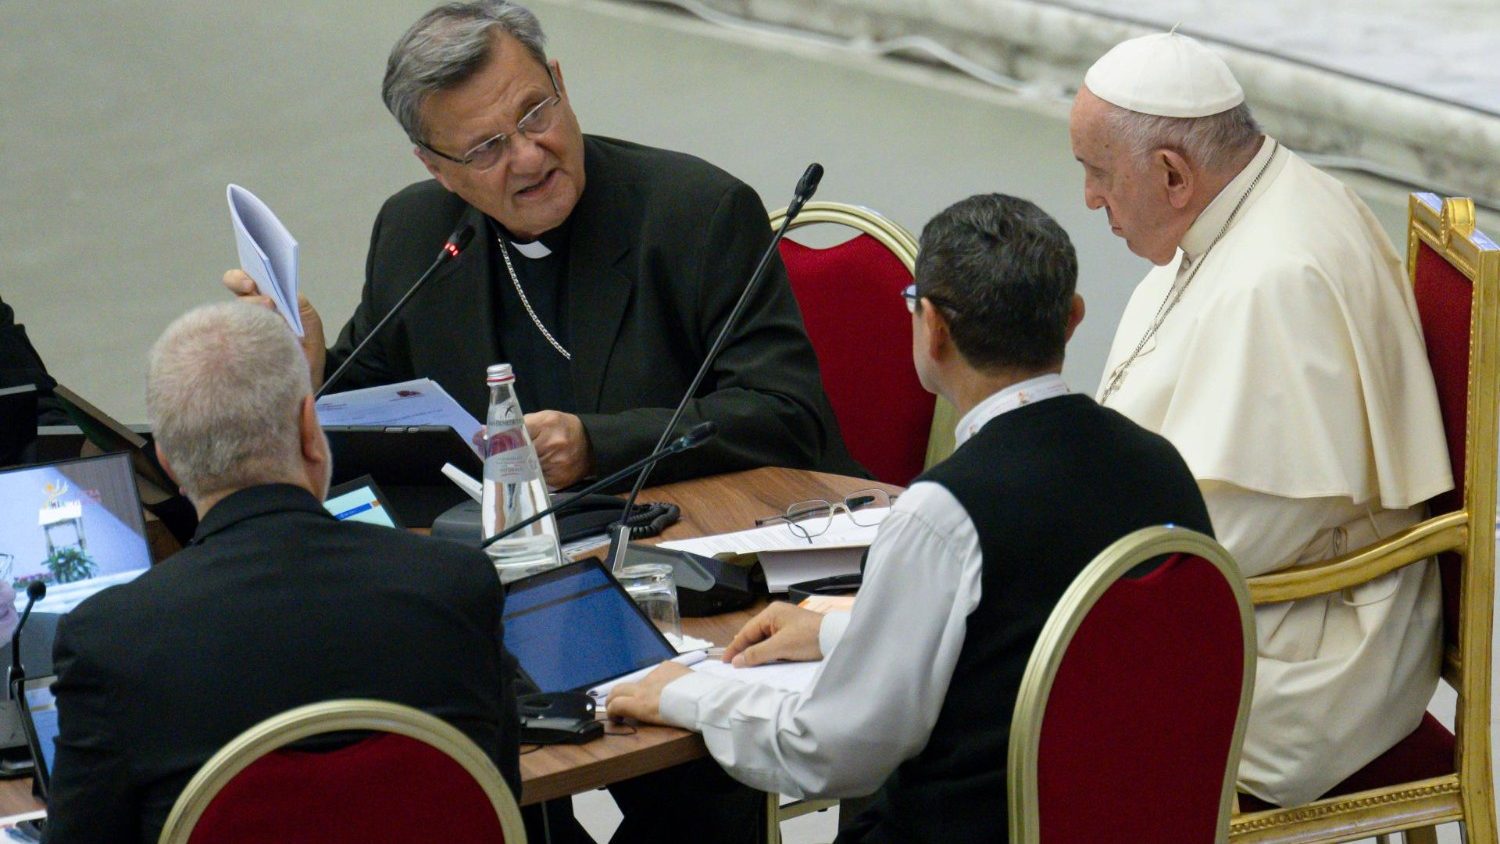 The Pope launches study groups on issues arising from the Council